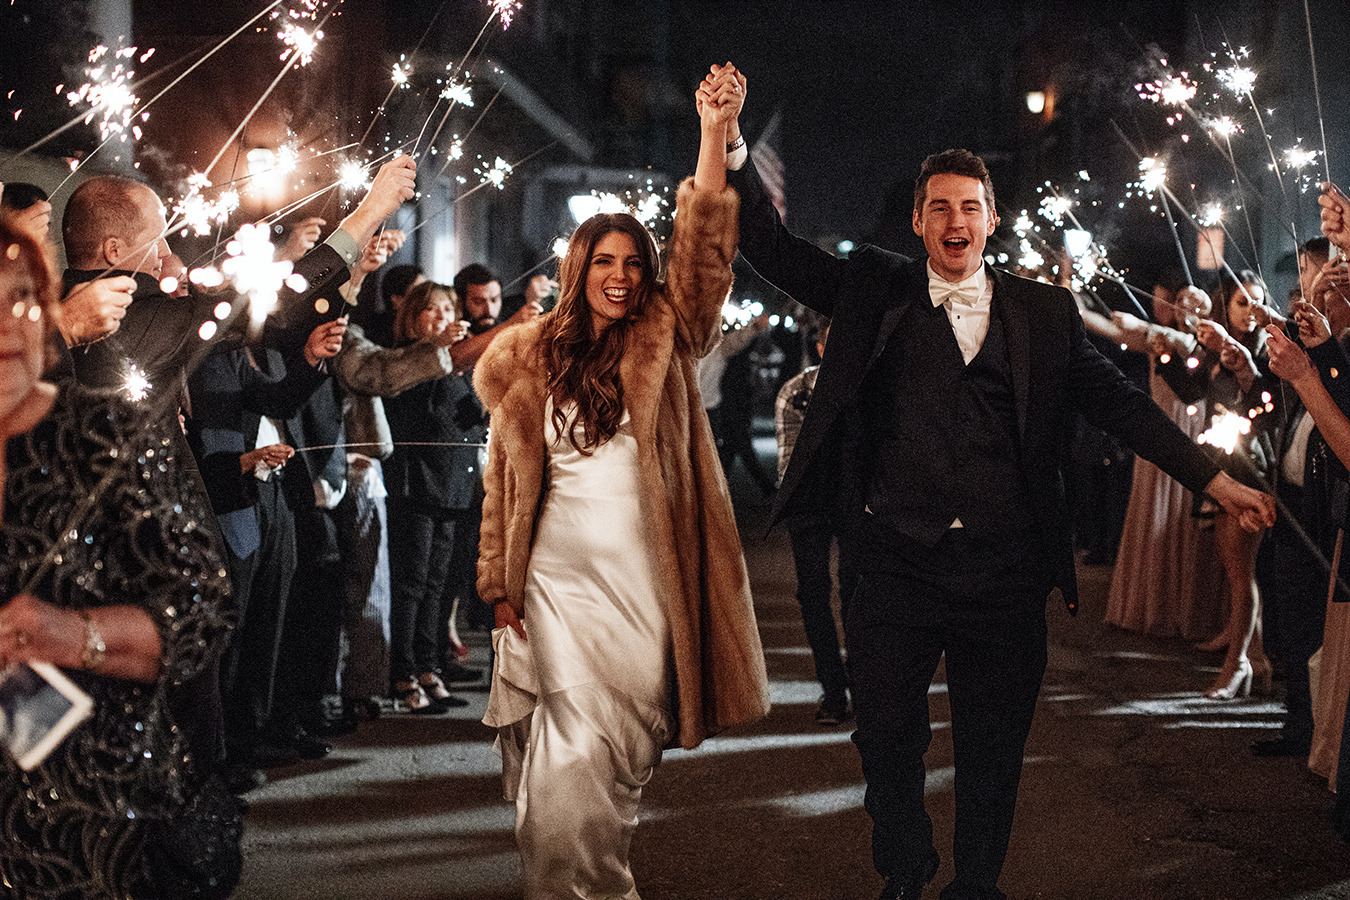 After a sparkler exit from the reception, Rebecca and Taylor second lined with their guests from Ursuline Convent through the French Quarter to the Hotel Monteleone on Royal Street. The happy couple honeymooned in Italy and shook hands with Pope Francis at the “Sposi Novelli” (newlywed) blessing.